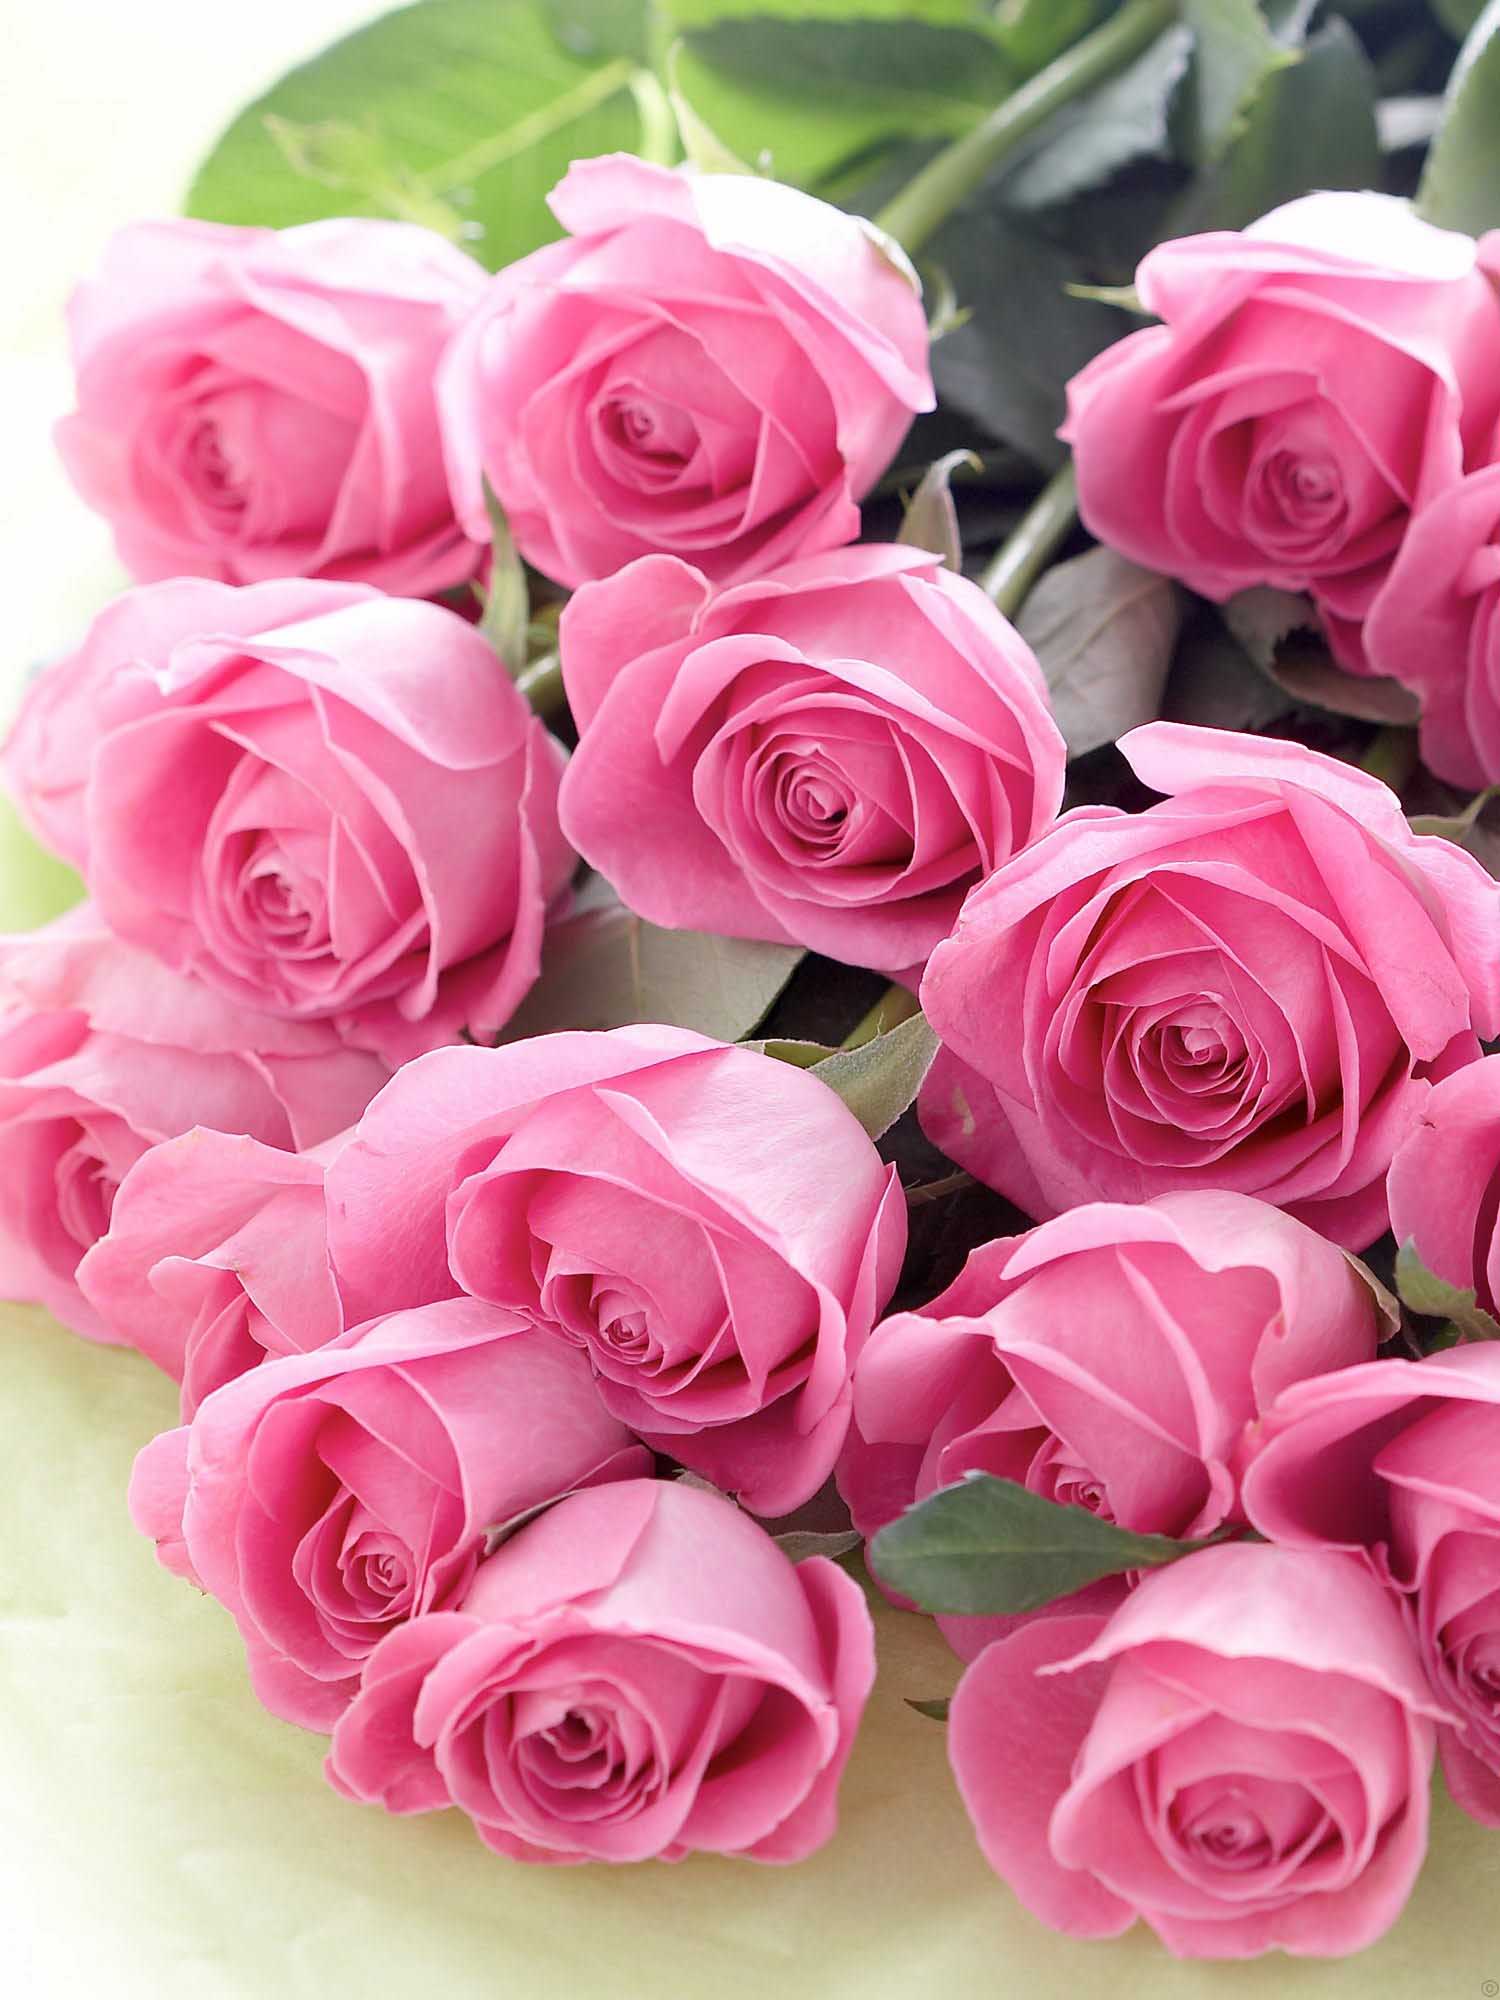 Pink Rose Hd Wallpapers Free Download | New HD Wallpapers Download